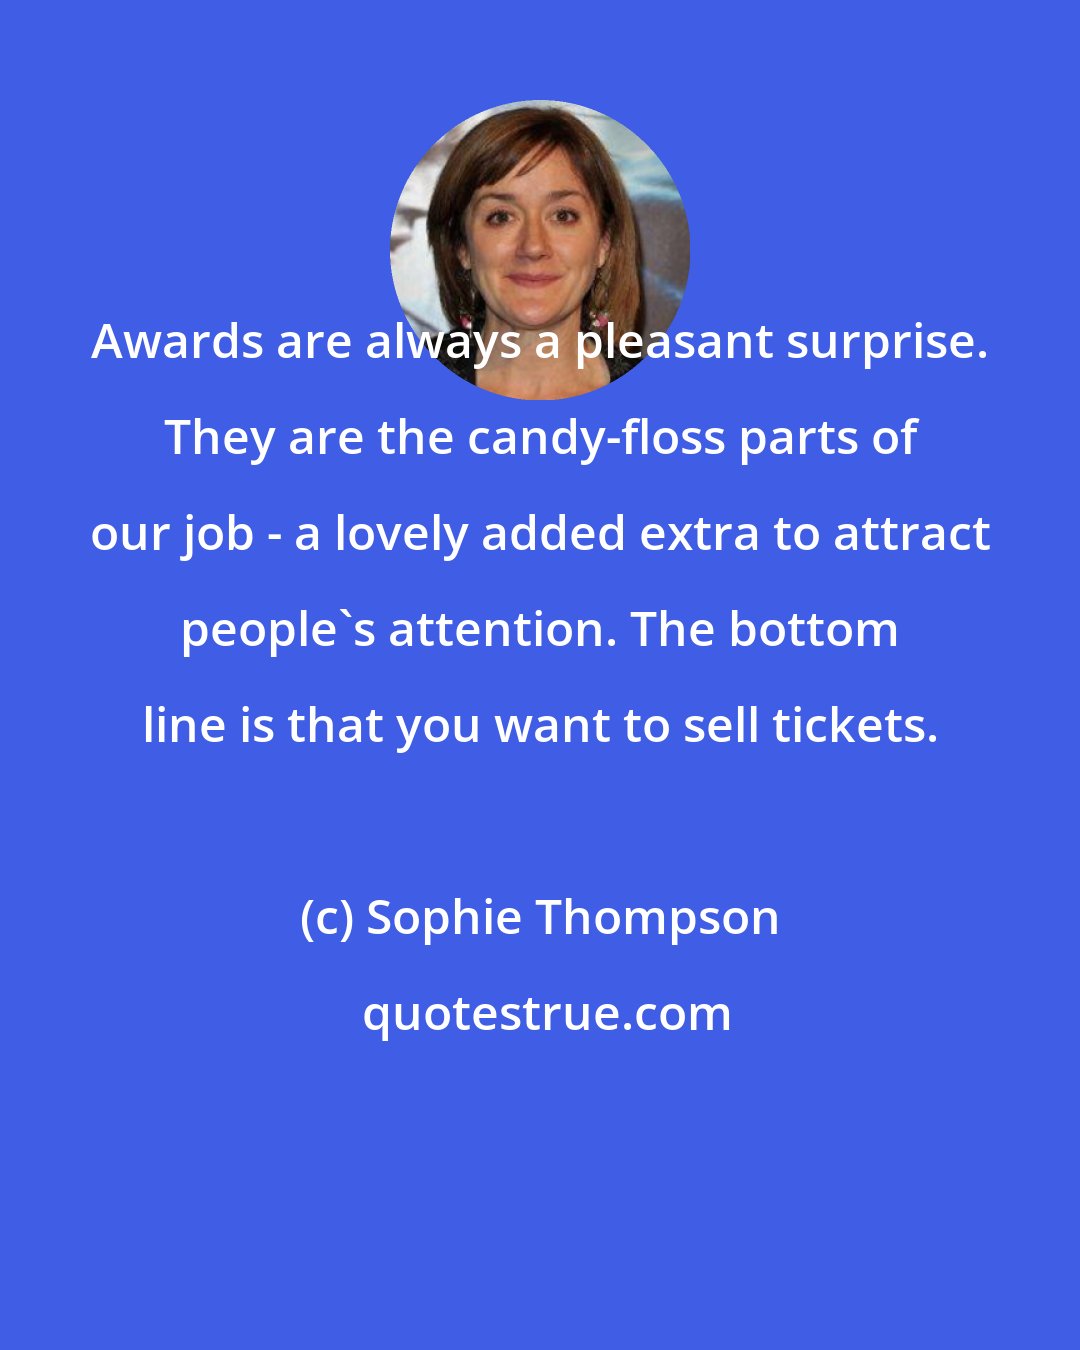 Sophie Thompson: Awards are always a pleasant surprise. They are the candy-floss parts of our job - a lovely added extra to attract people's attention. The bottom line is that you want to sell tickets.